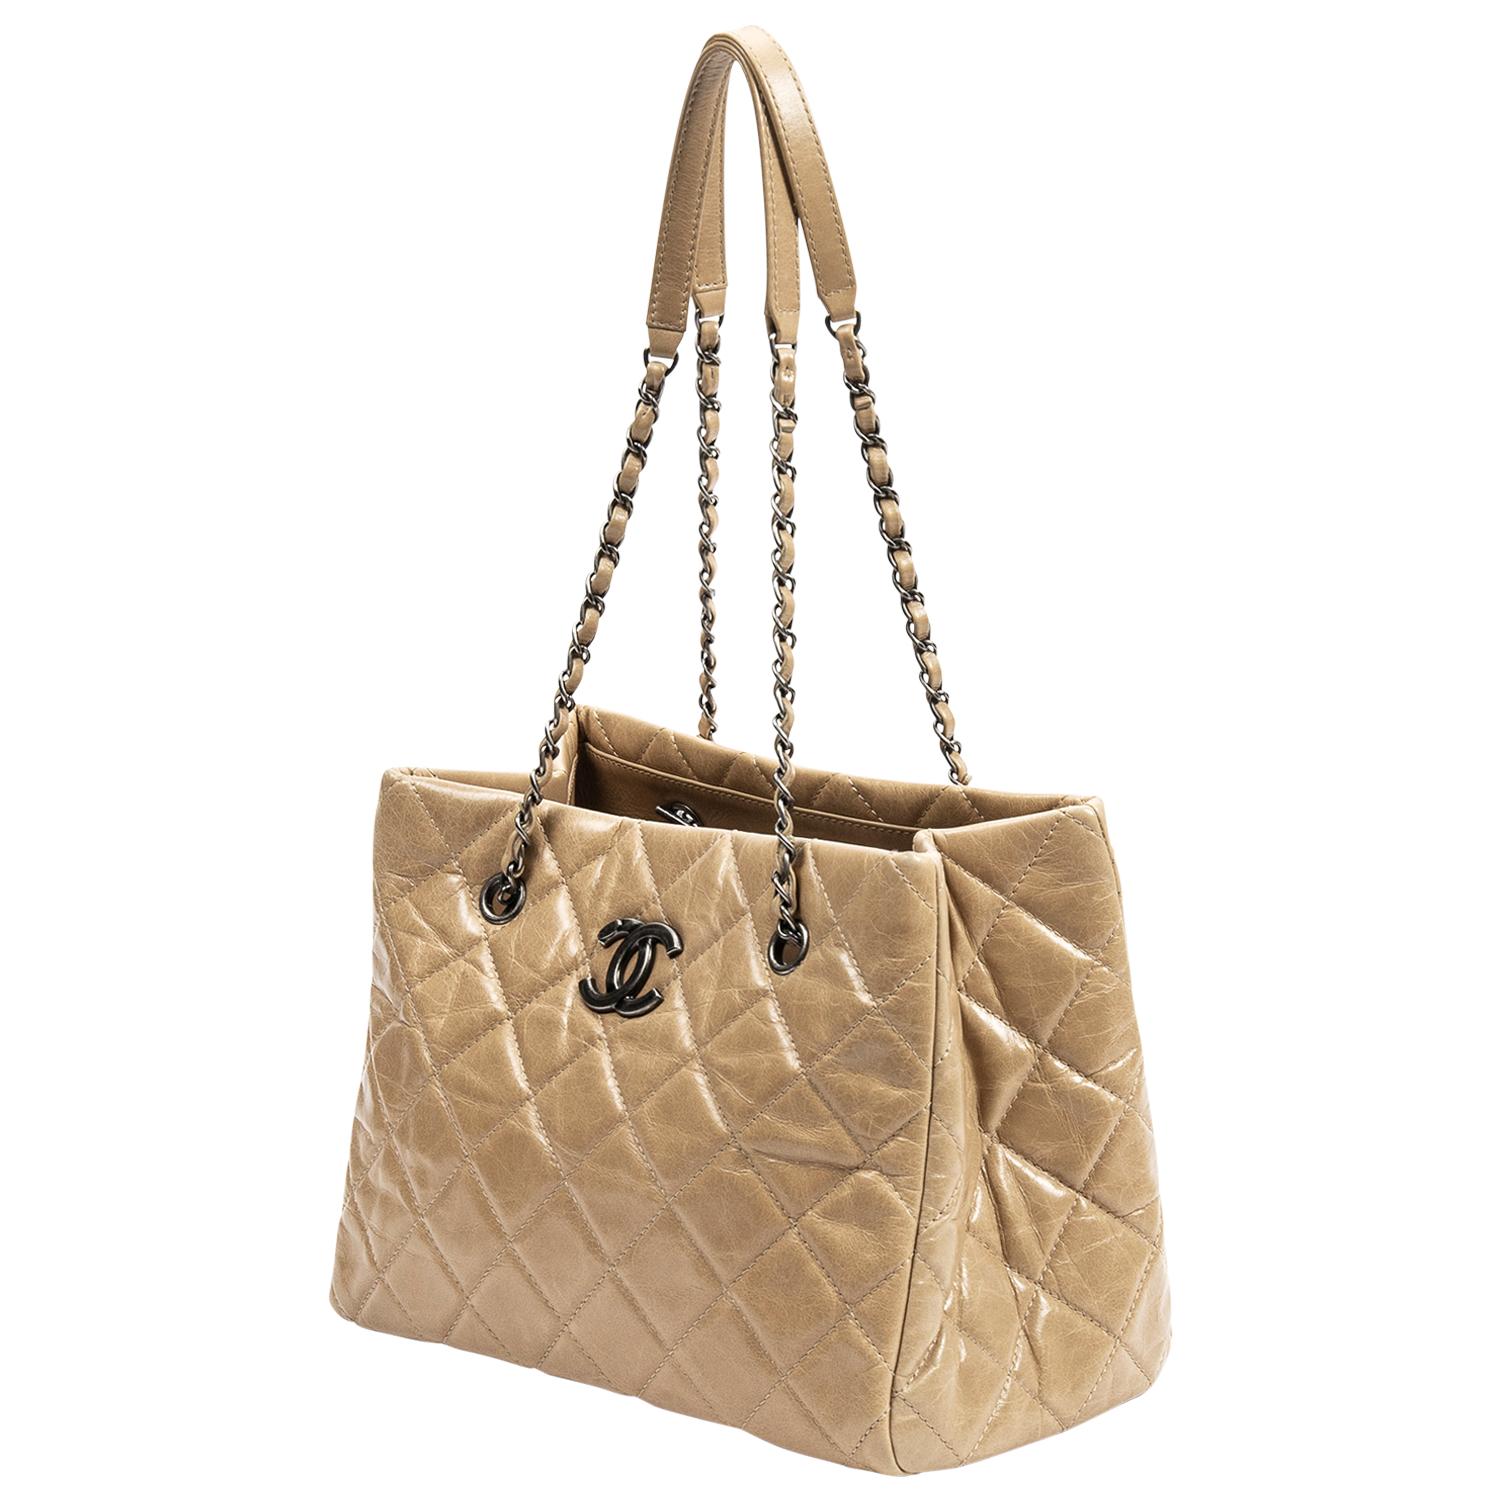 Beige is the new black! Super rare tan/beige quilted crinkled calfskin tote from 2014, crafted in leather, ruthenium hardware, the iconic CC logo plate, dual interwoven shoulder straps with shoulder rests and protective metal feet. This beauty opens